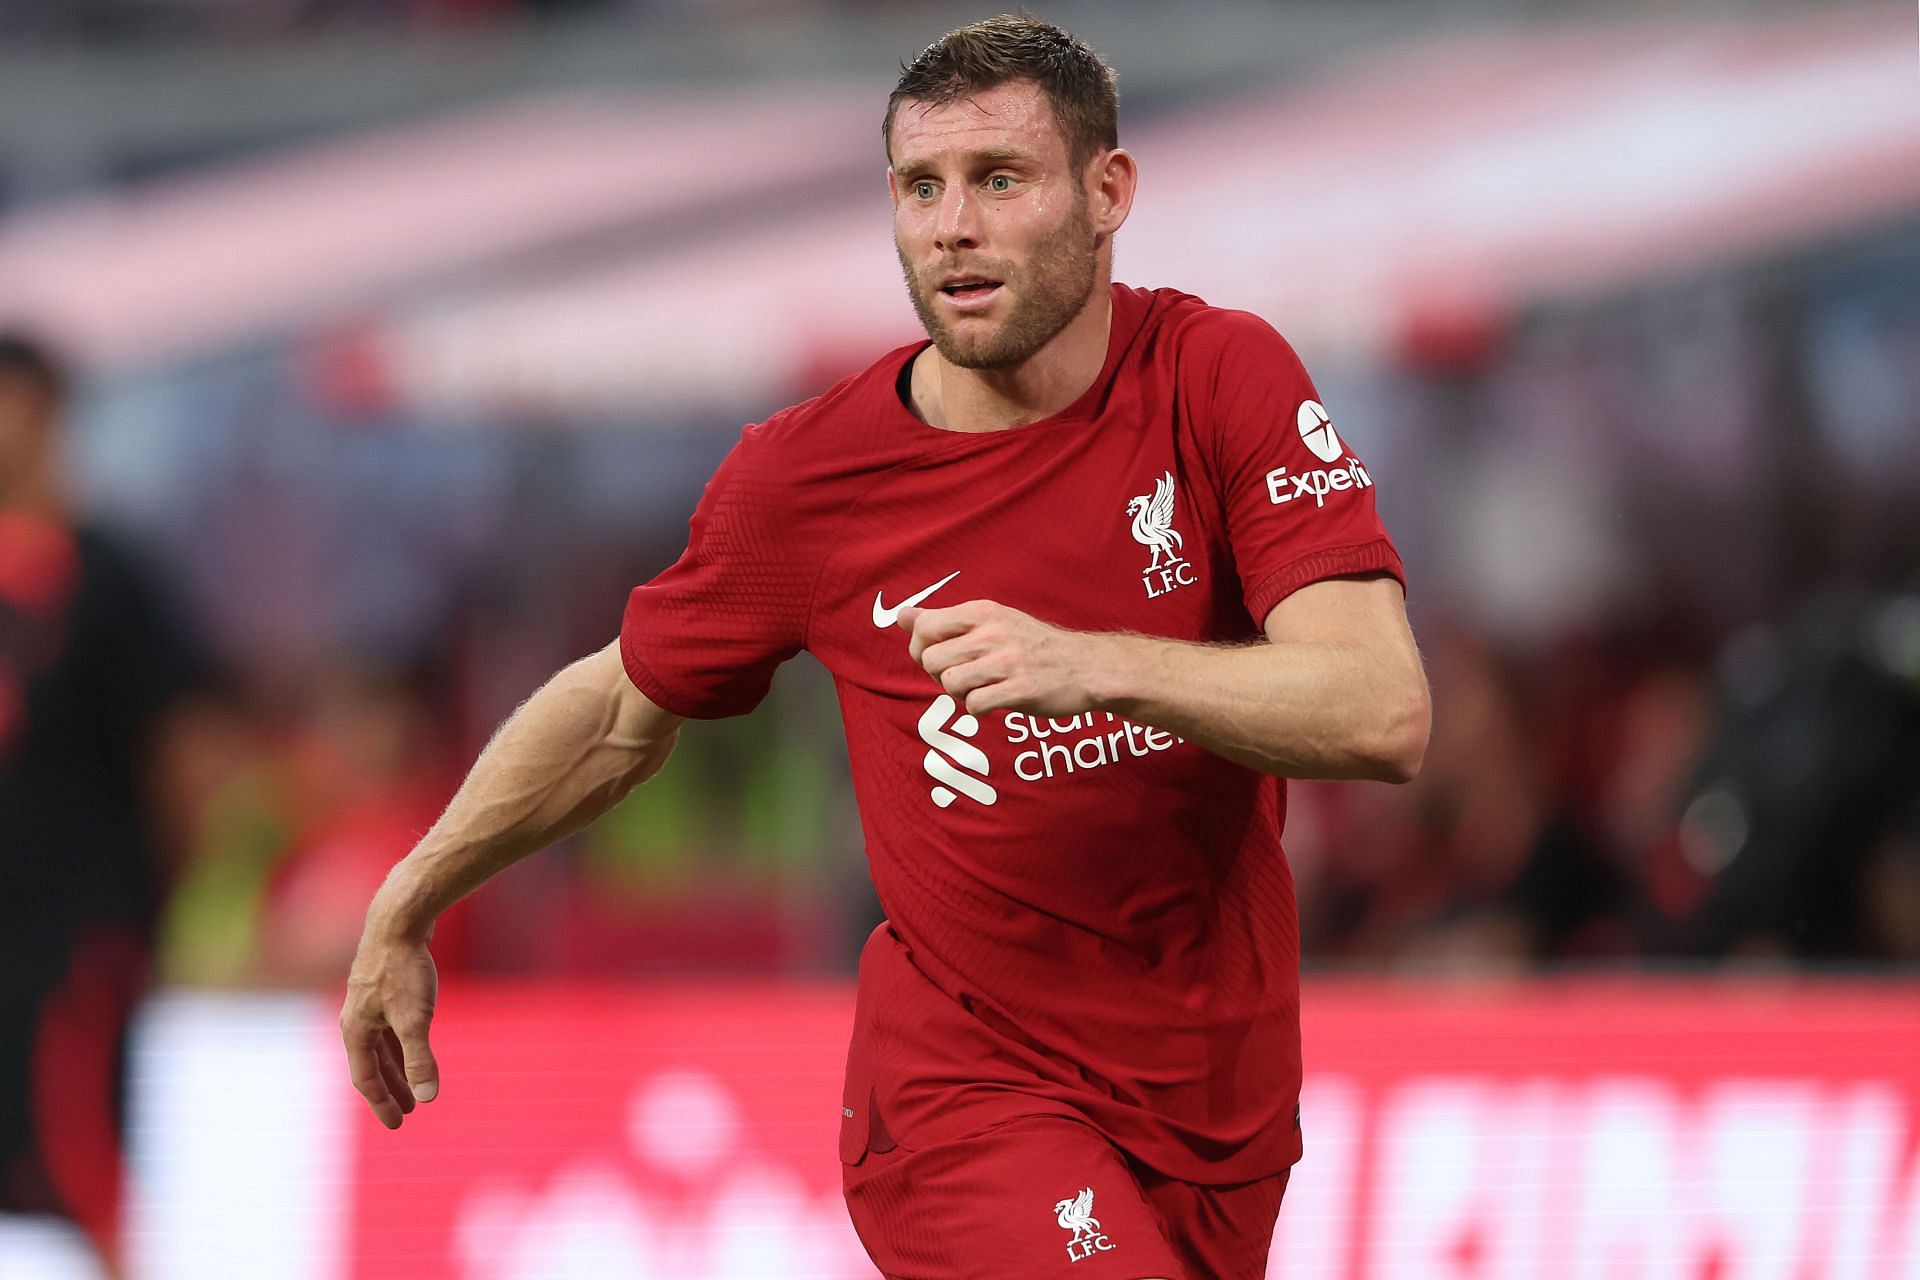 Read more about the article James Milner’s former club make last-ditch effort to sign Liverpool midfielder as he edges closer to Brighton move